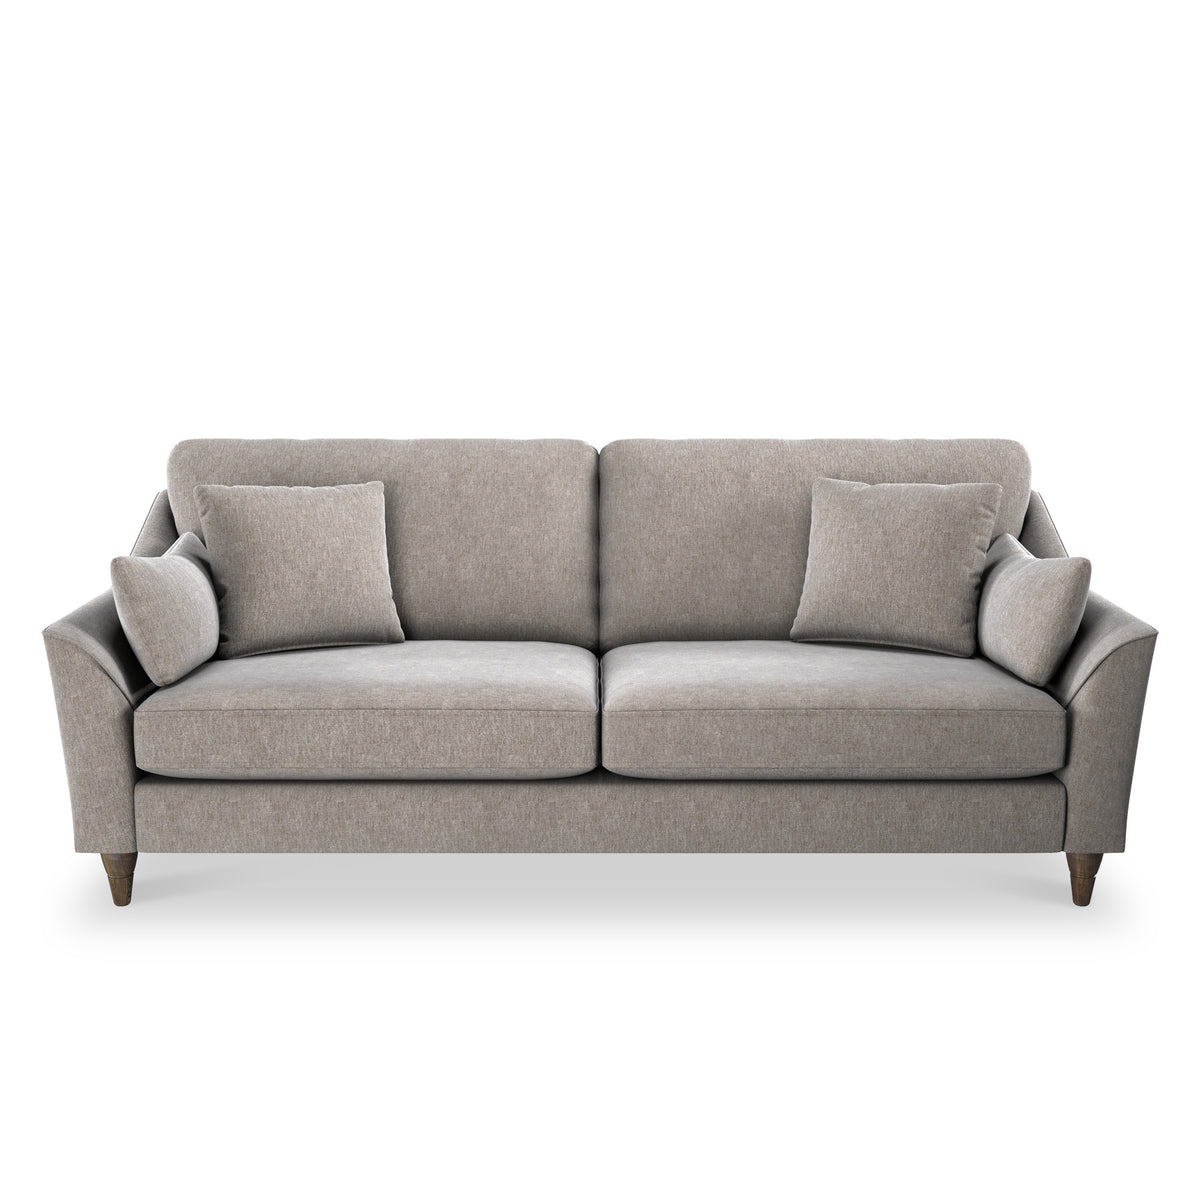 Charice Fog Grey 3 Seater couch